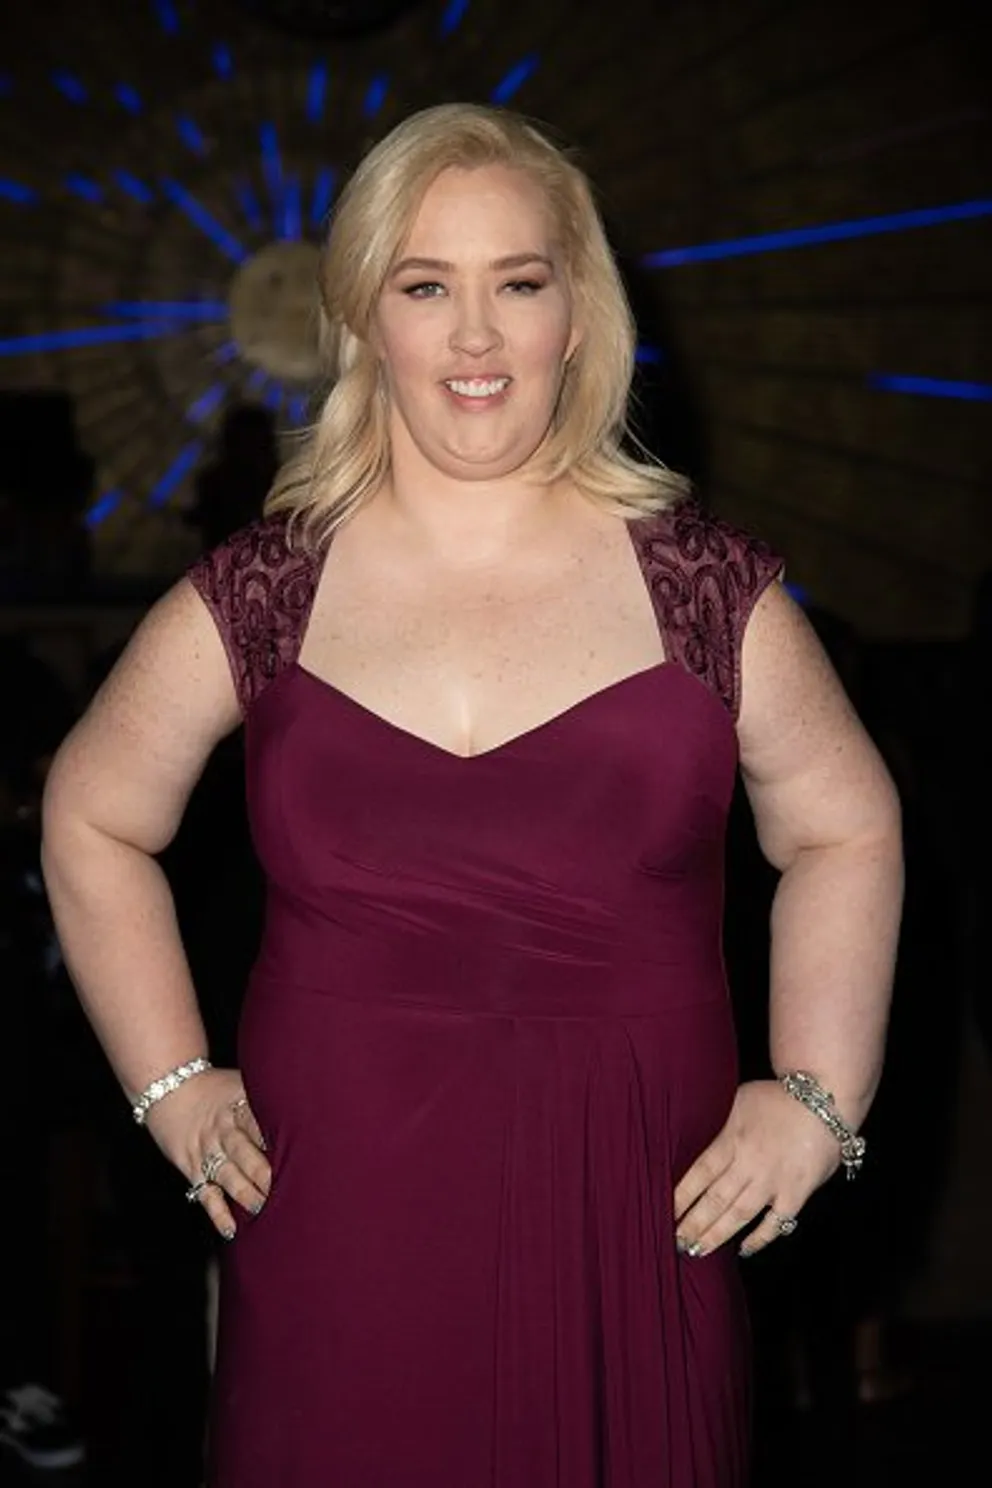 Mama June at Bossip Best Dressed List Event on July 31, 2018 in Los Angeles, California. | Photo: Getty Images